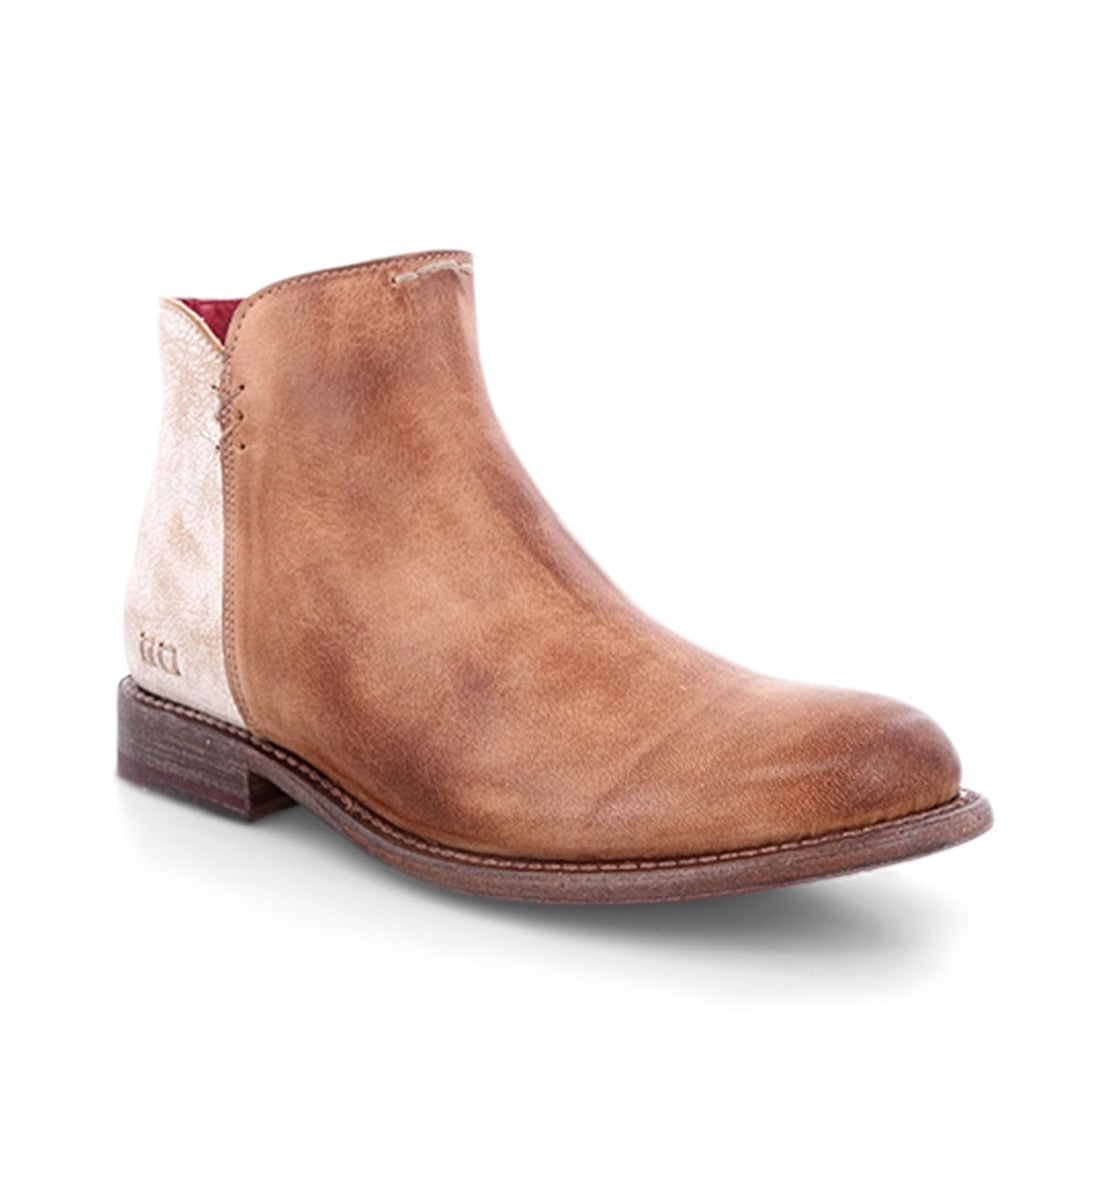 Bed Stu's Yurisa women's chelsea boots in tan and white.